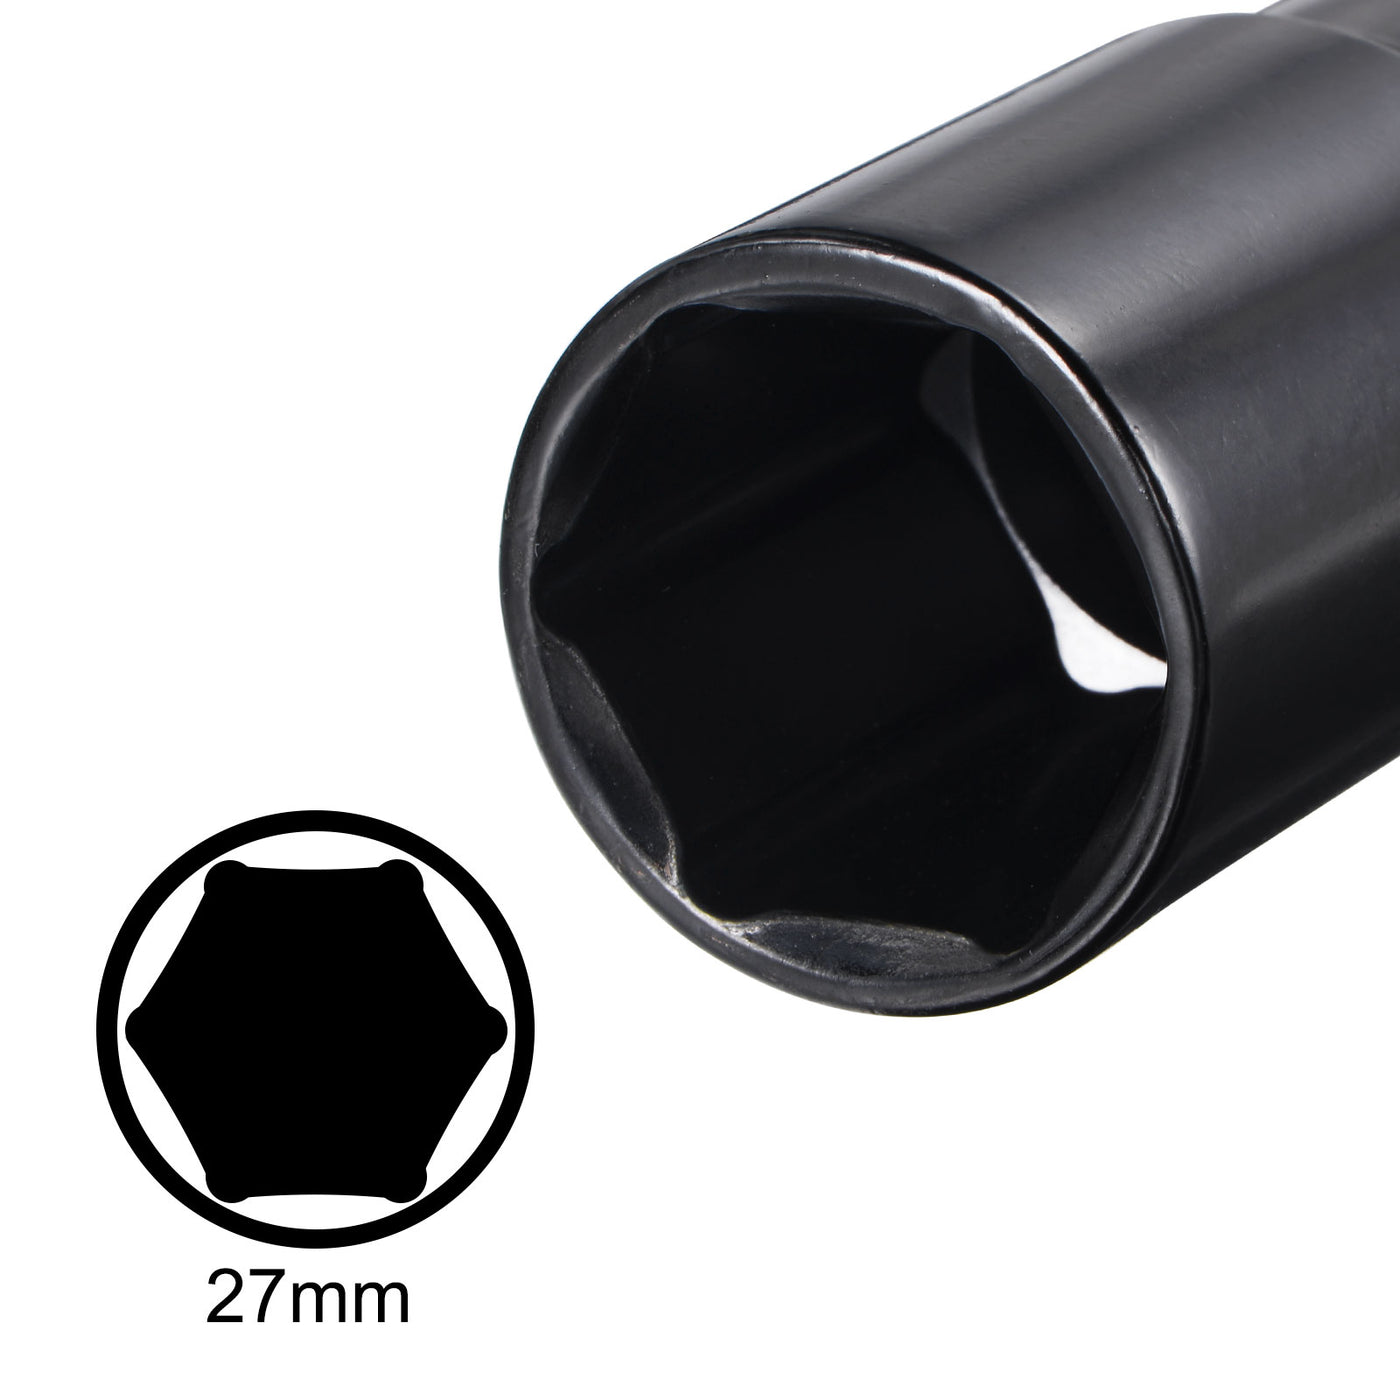 uxcell Uxcell Square Drive by Deep Impact Socket, CR-V, 6-Point Metric